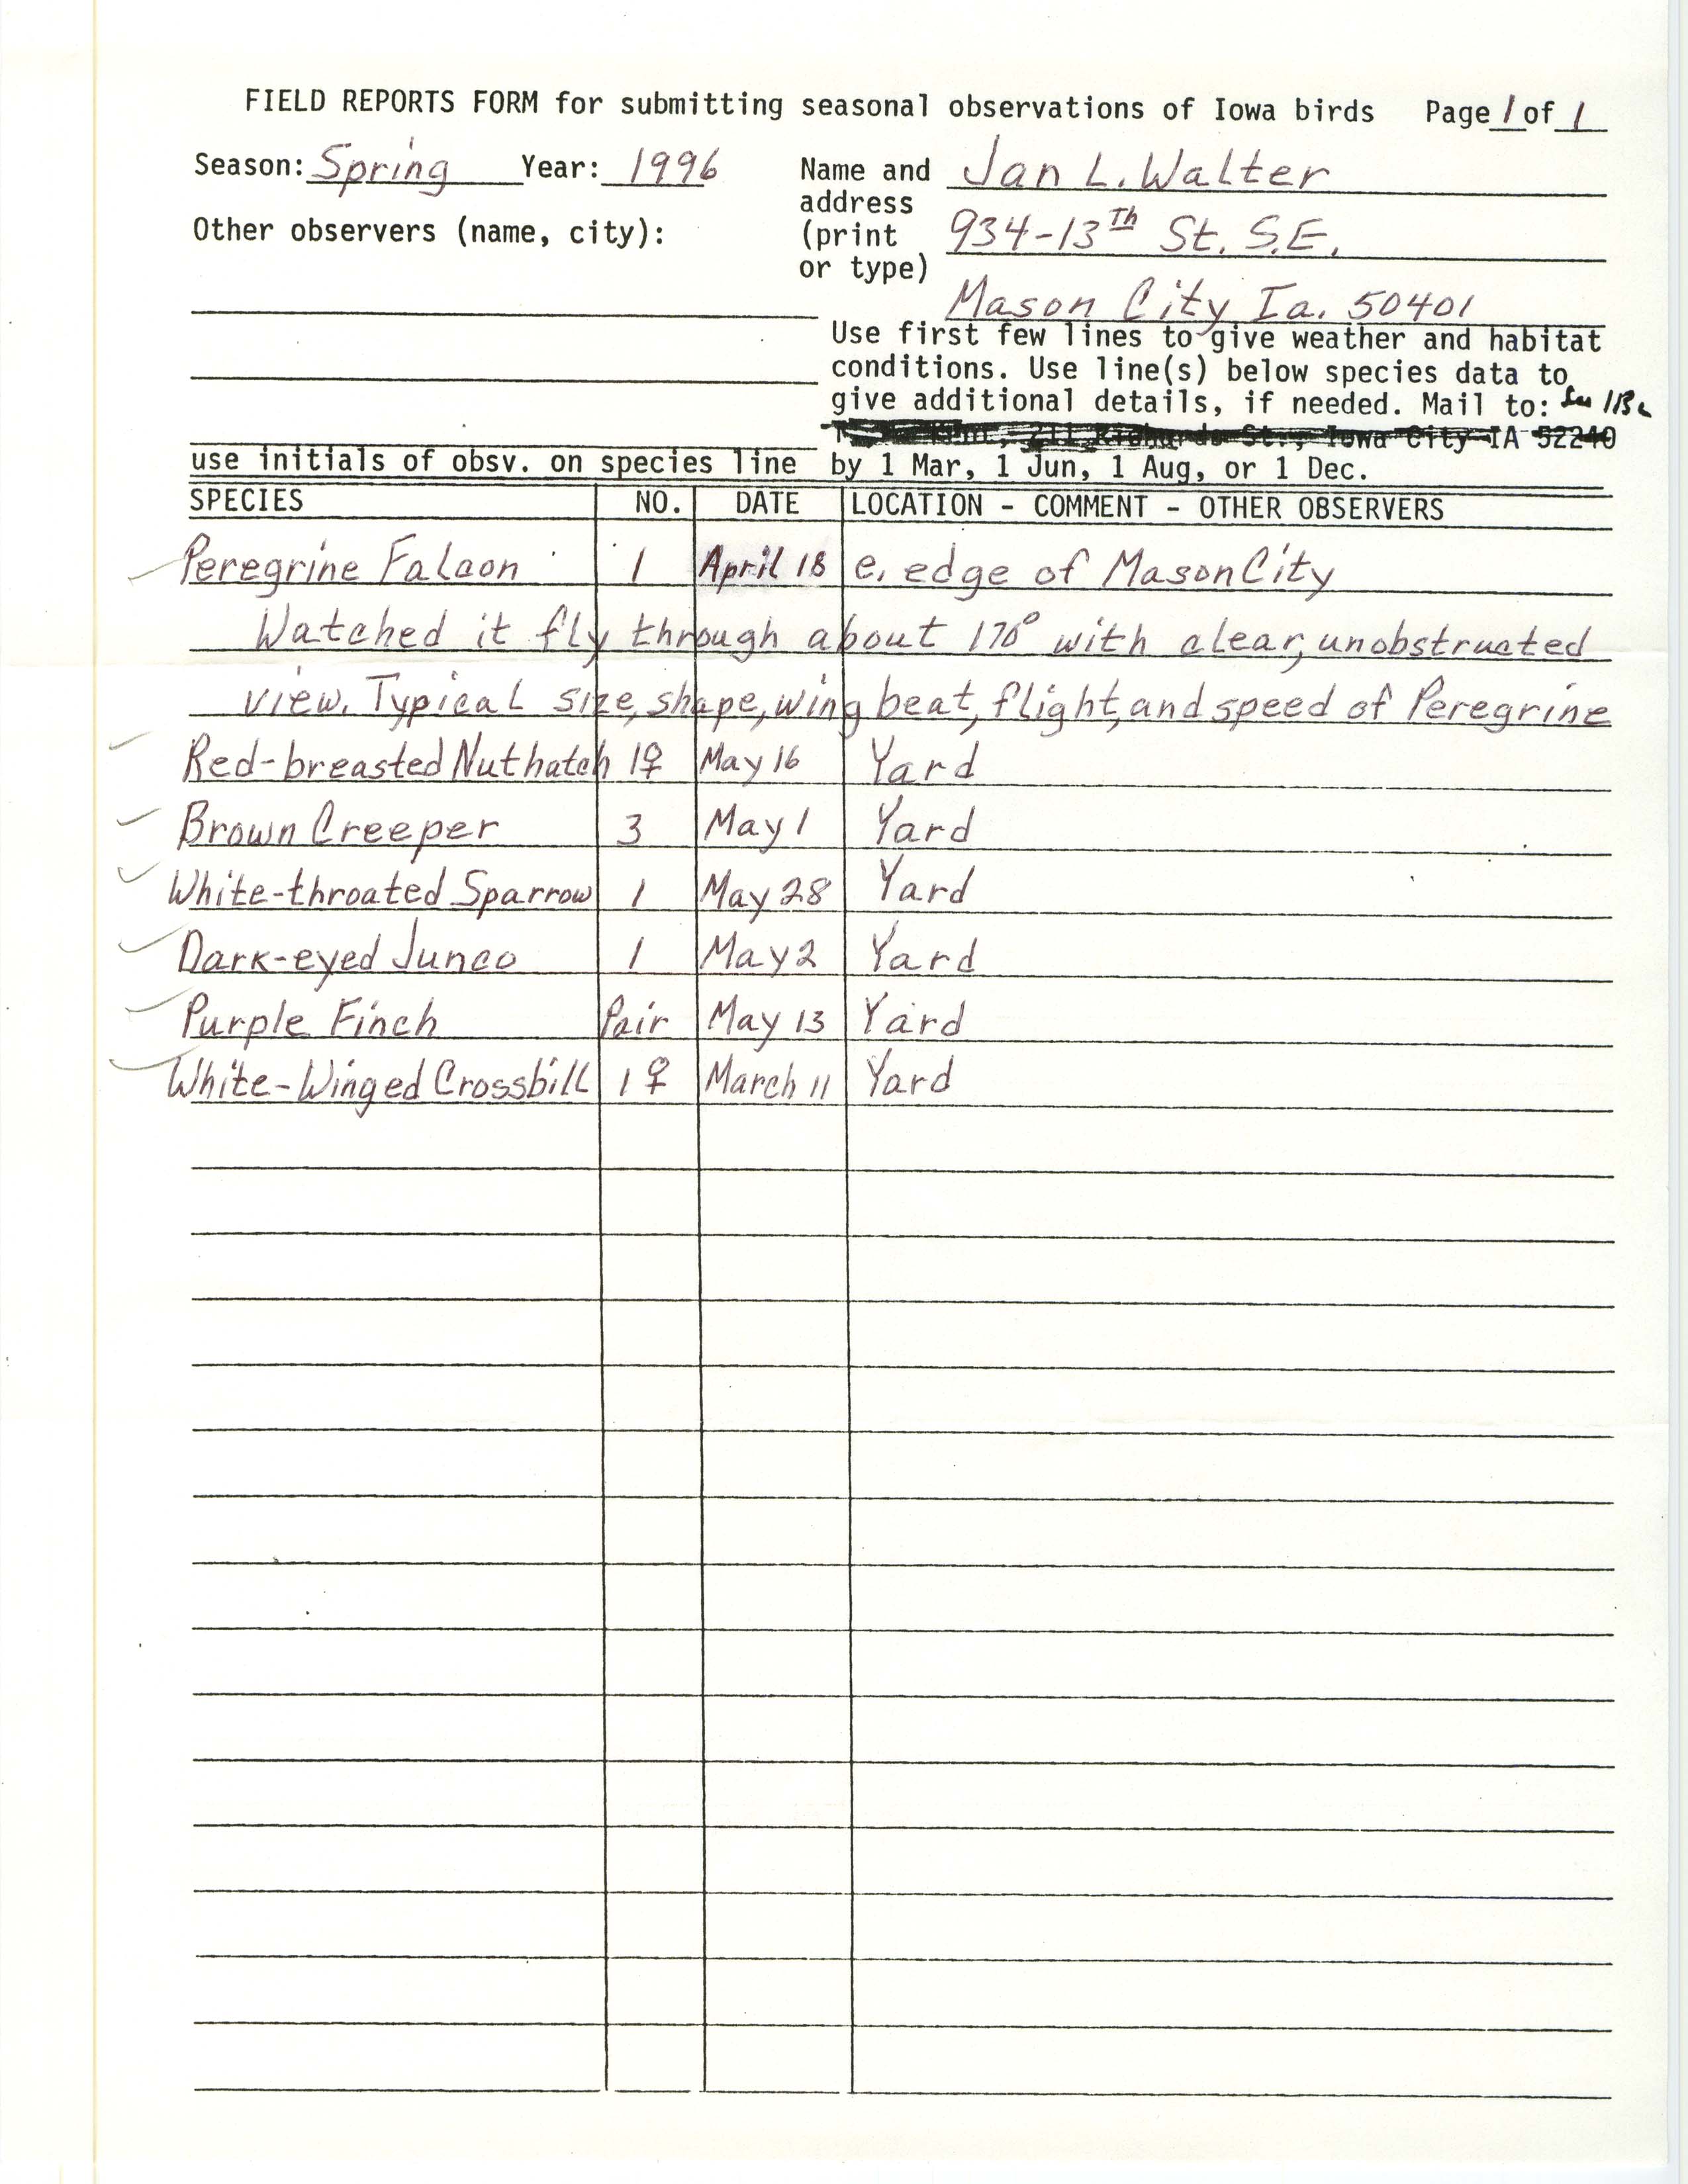 Field reports form for submitting seasonal observations of Iowa birds, Jan L. Walter, spring 1996